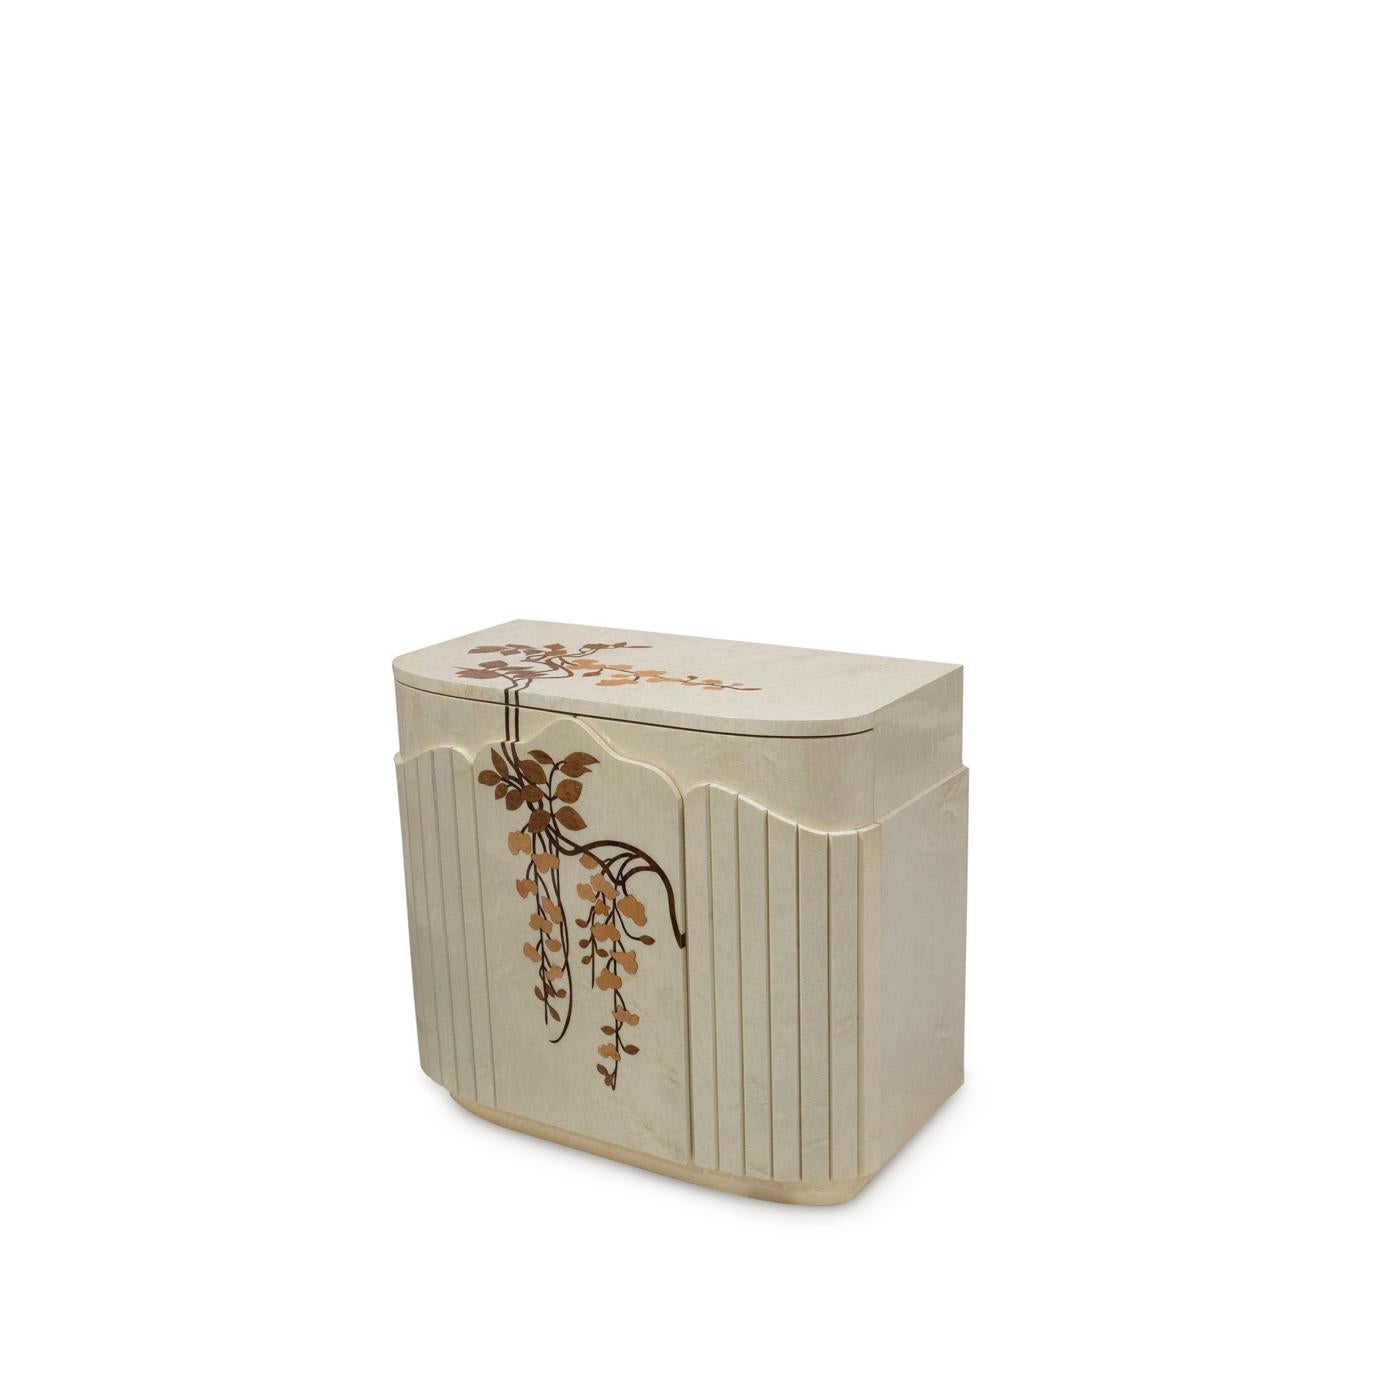 With its oval body, architectural details, sheen lacquered finish and whimsical stylized floral marquetry the Fleur Nightstand's charm is sure to add glamour to the bedroom. Each flower is cut by hand from thin sheets of wood veneer. The delicate